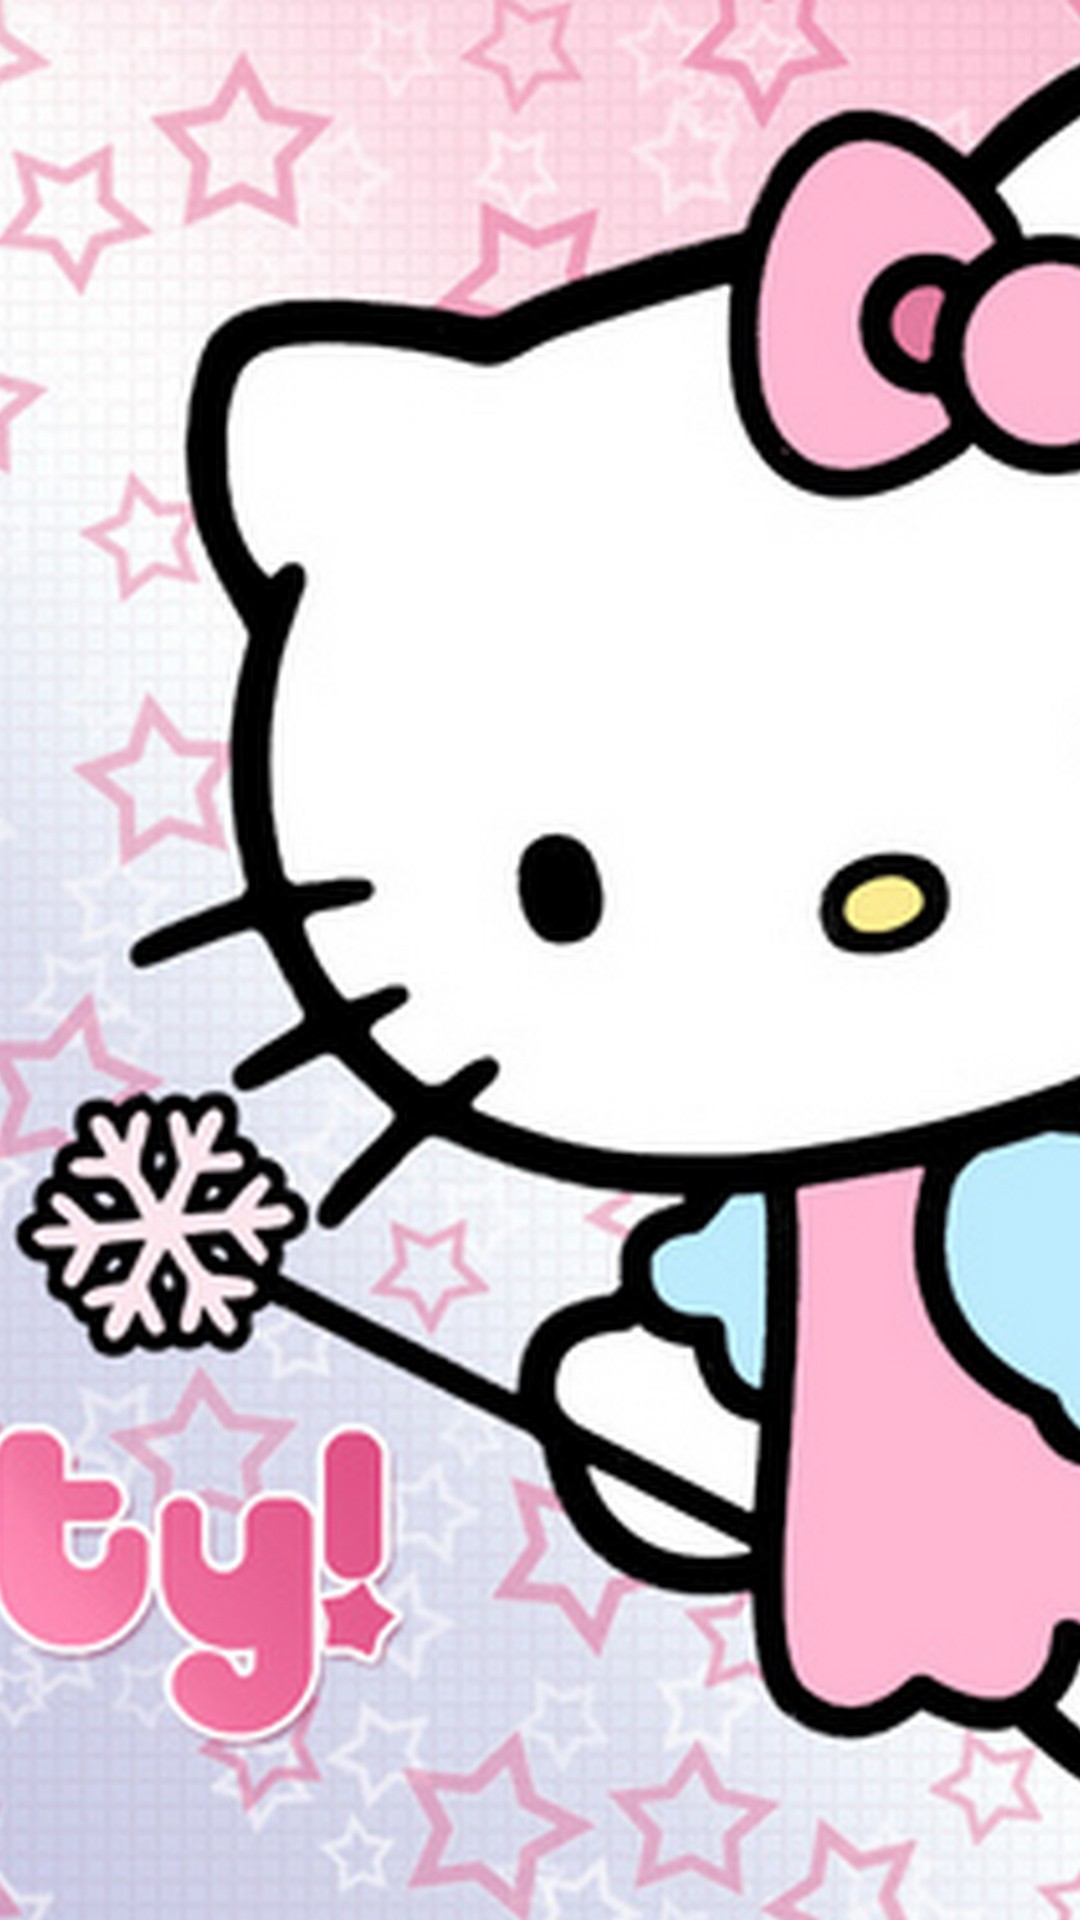 Android Wallpaper Sanrio Hello Kitty with resolution 1080X1920 pixel. You can make this wallpaper for your Android backgrounds, Tablet, Smartphones Screensavers and Mobile Phone Lock Screen